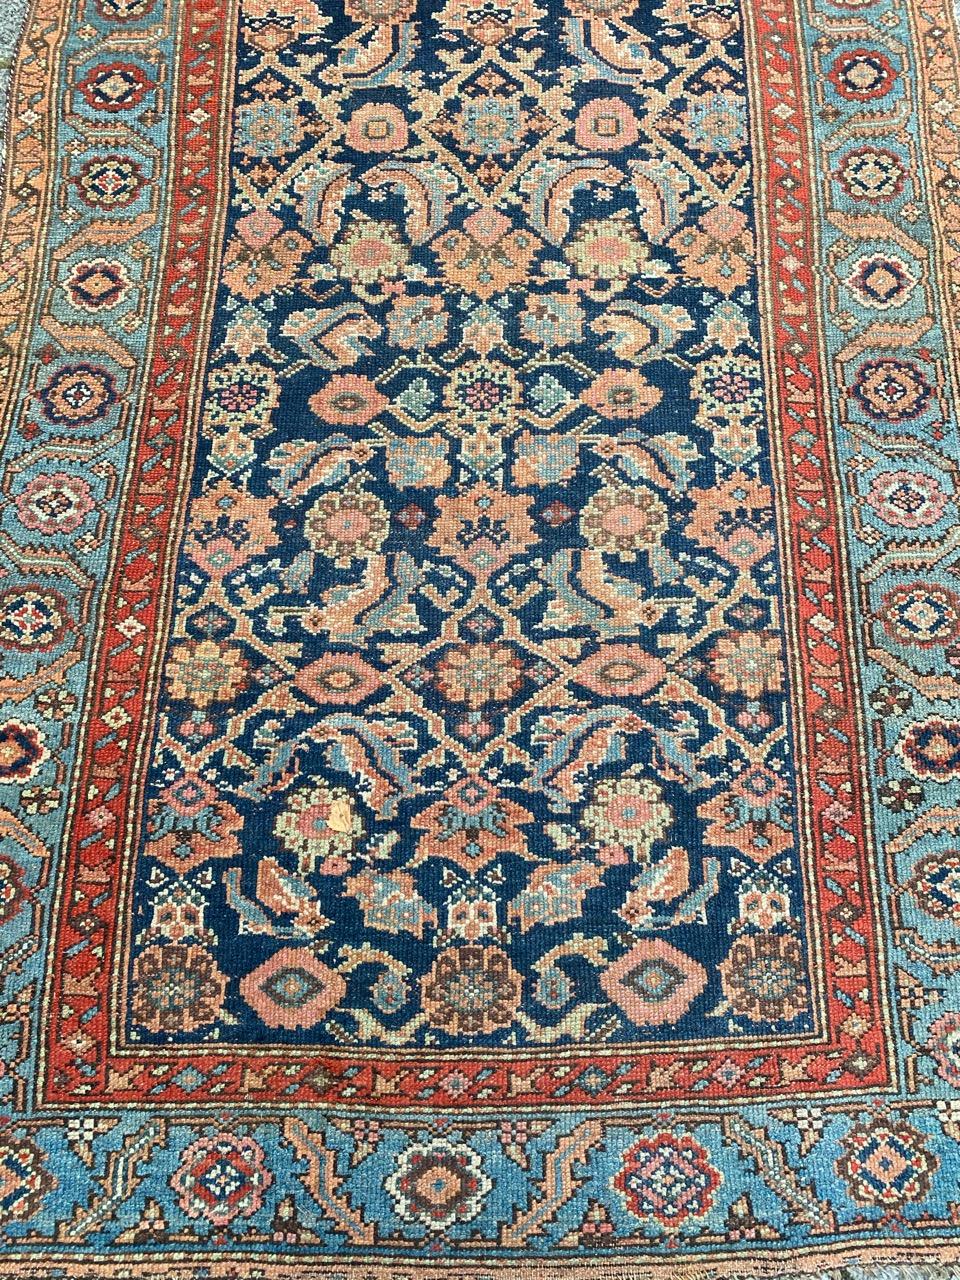 Very beautiful antique runner with nice mahal design and beautiful natural colors, entirely hand knotted with wool velvet on wool foundation.
  
✨✨✨
